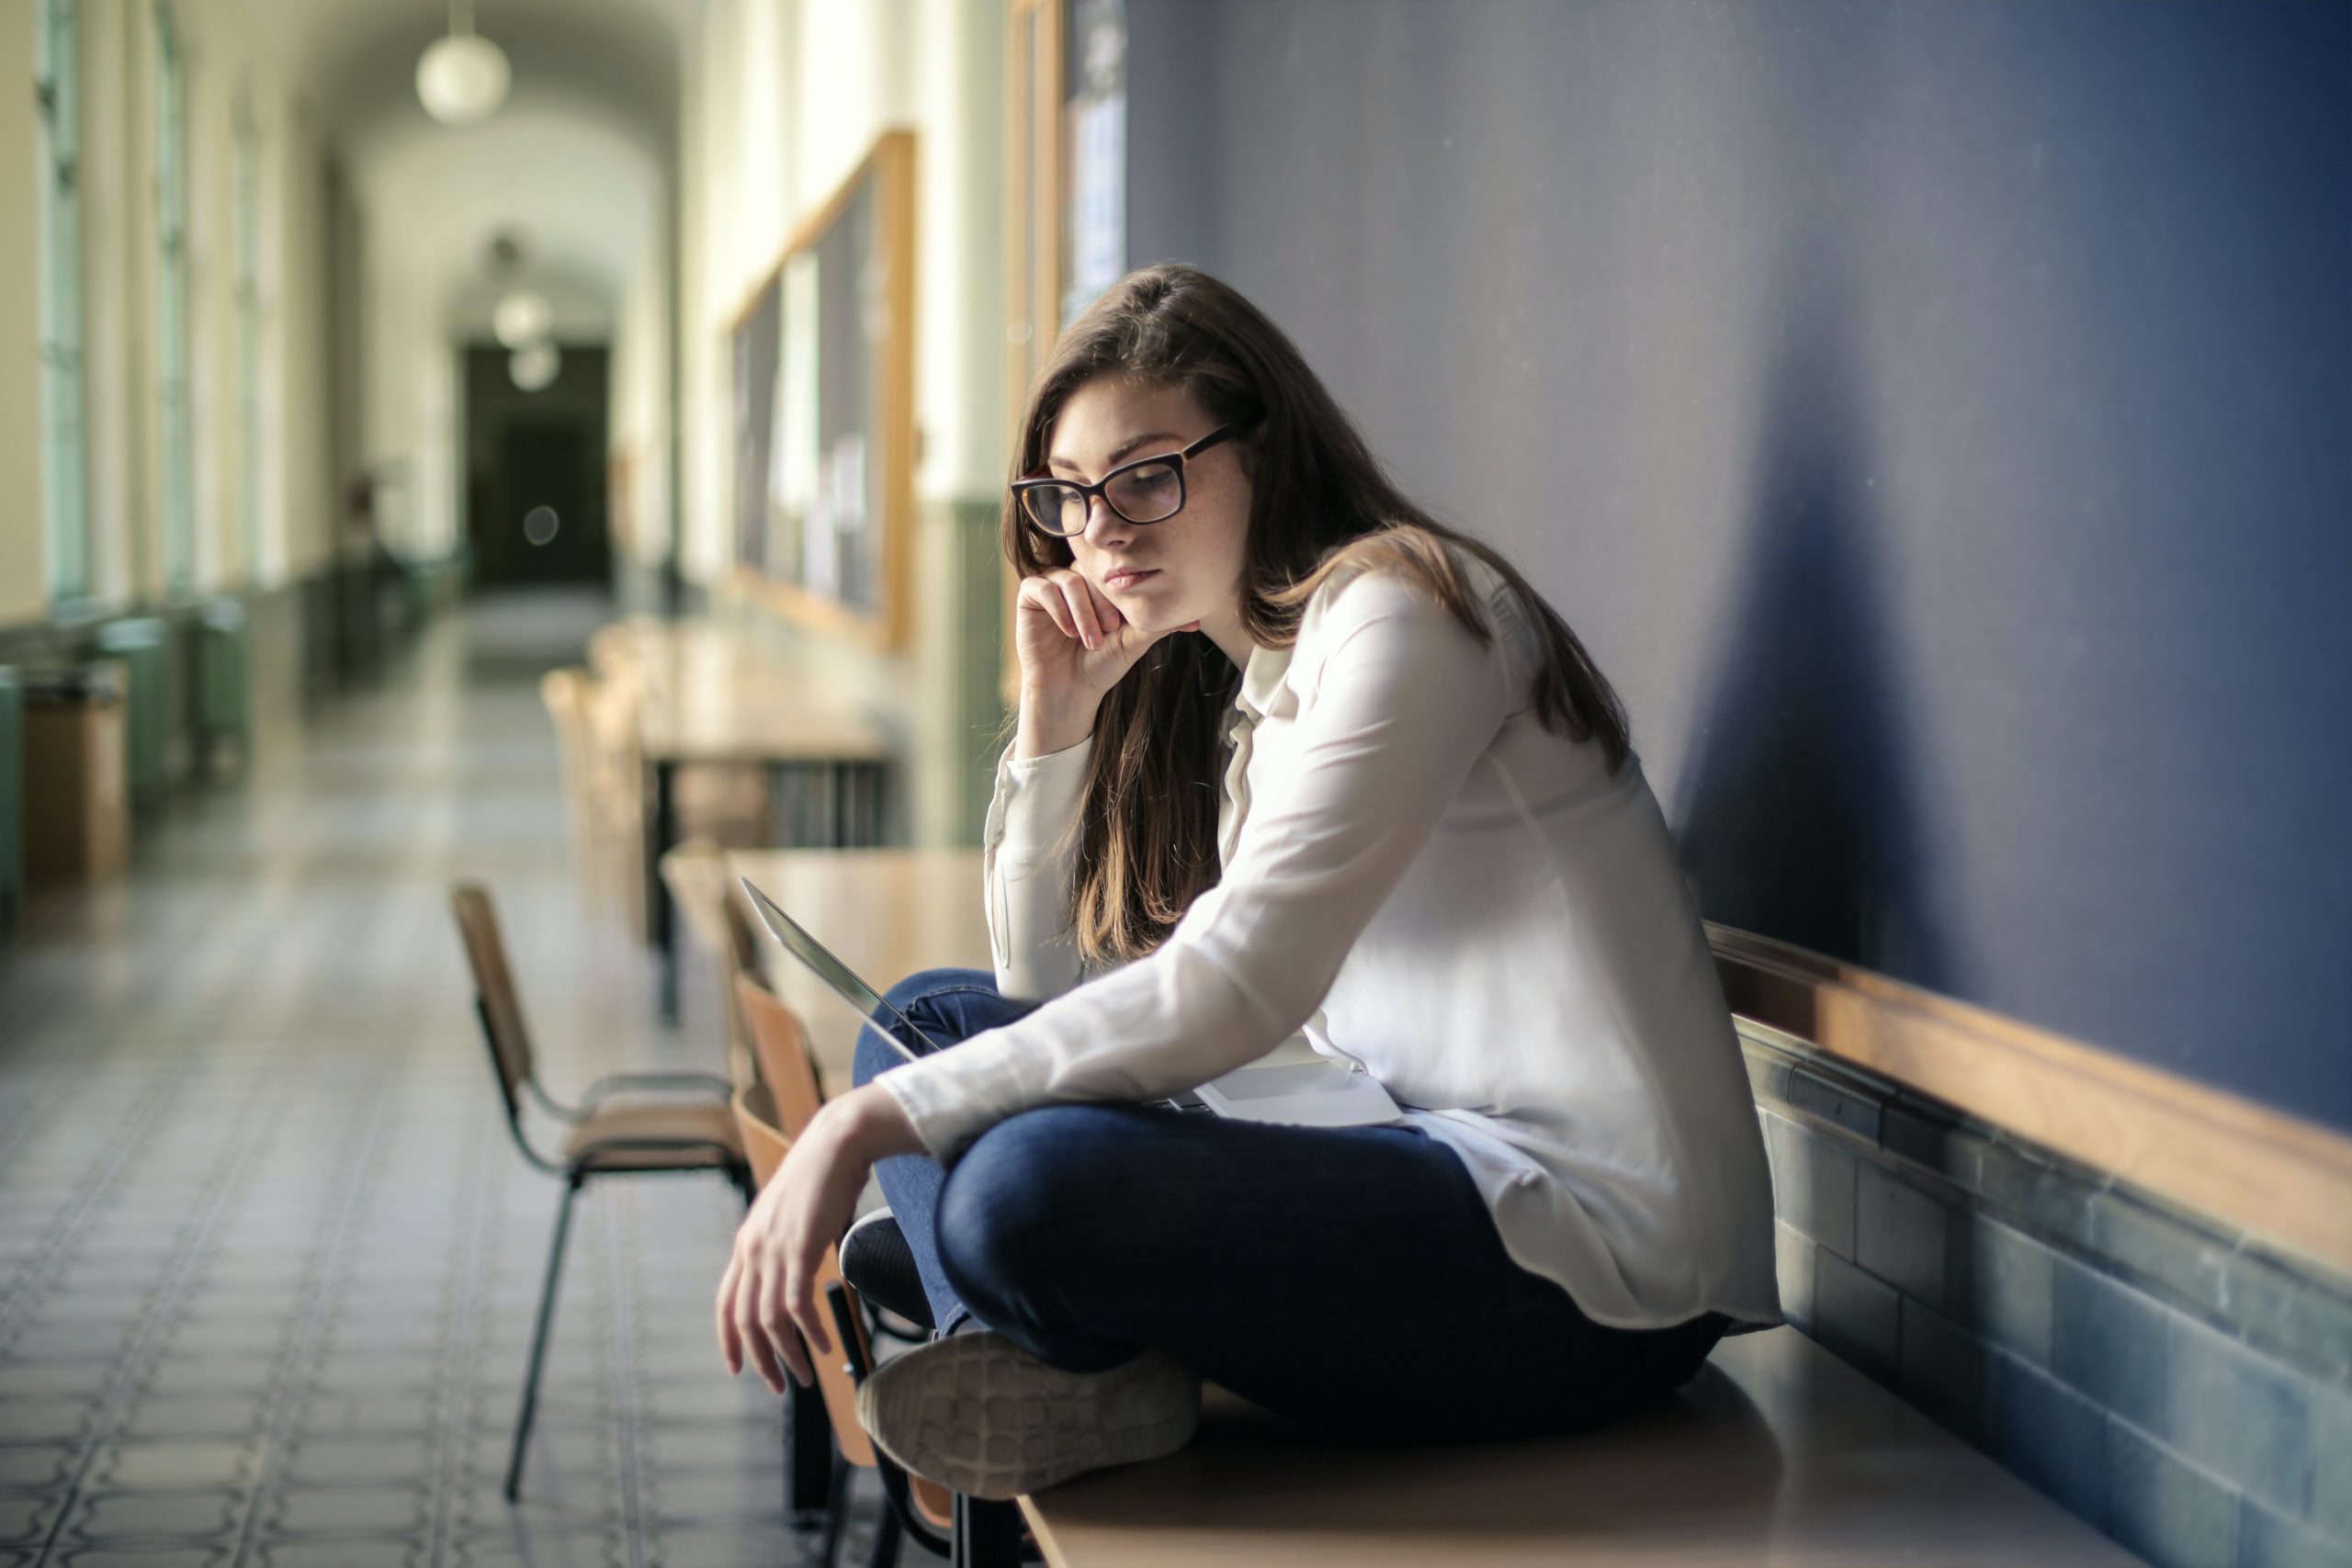 Student sitting alone with her computer in her lap, looking into the distance